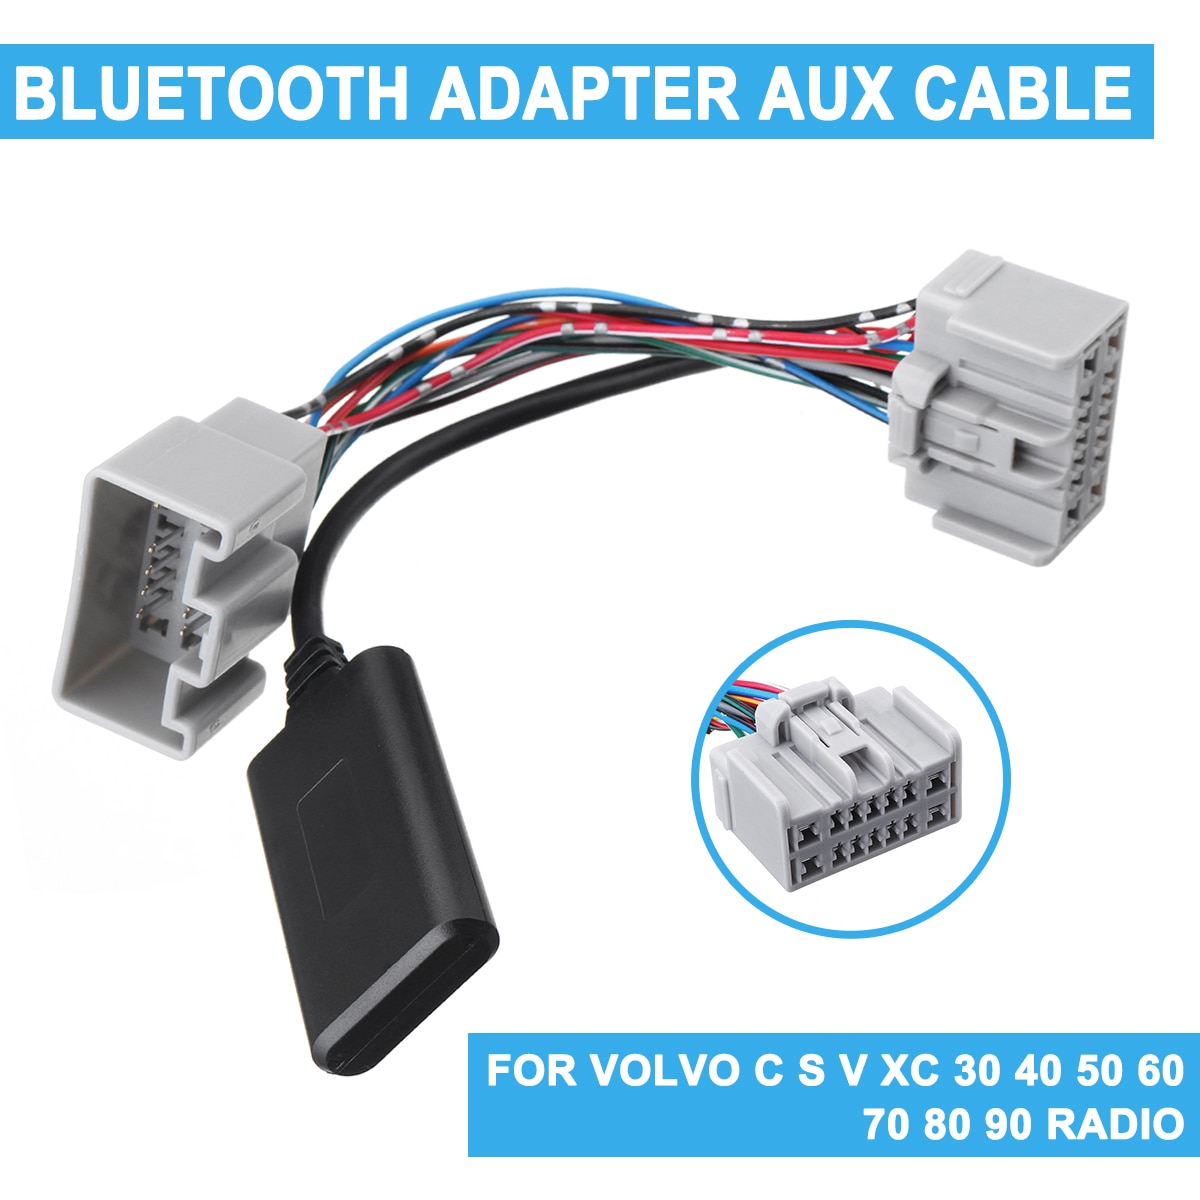 Voor Volvo C S V Xc 30 40 50 60 70 80 90 Auto Bluetooth Aux Adapter Kabel Radio Carselectronics accessoires Voor Bluetooth Aux